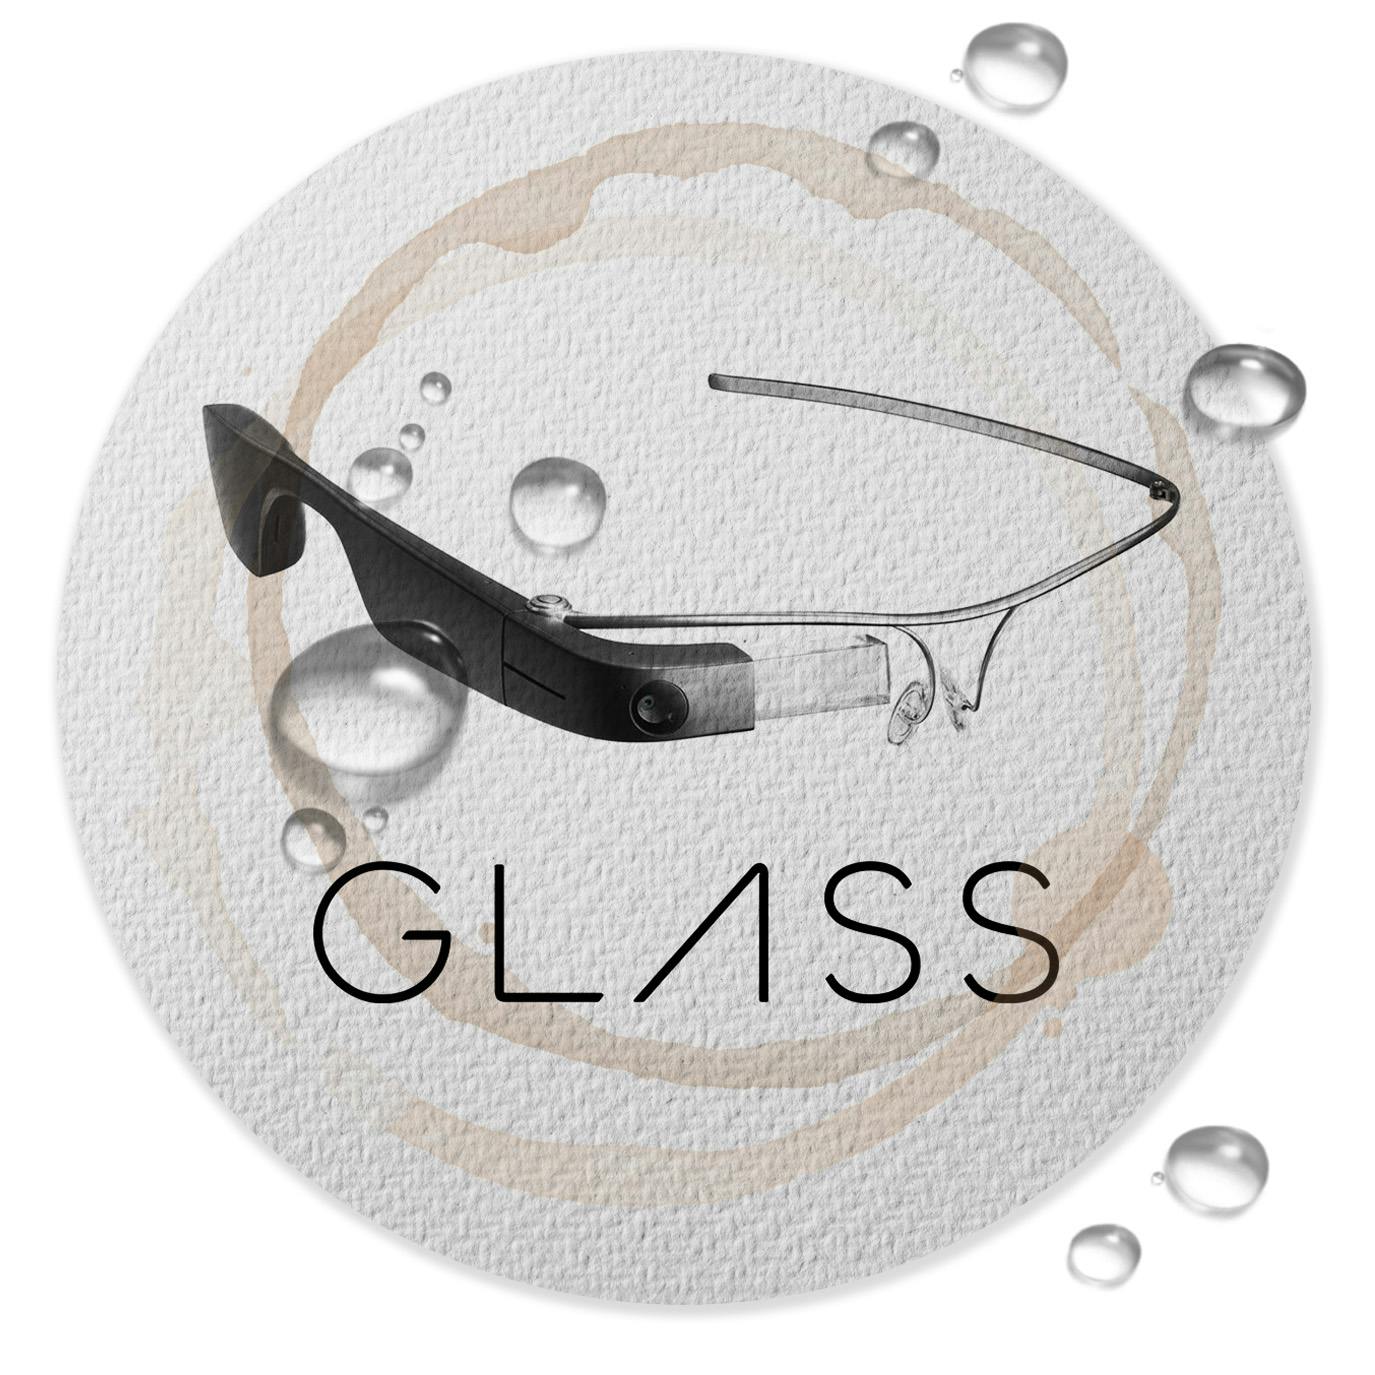 Episode 66: The Failure of Google Glass